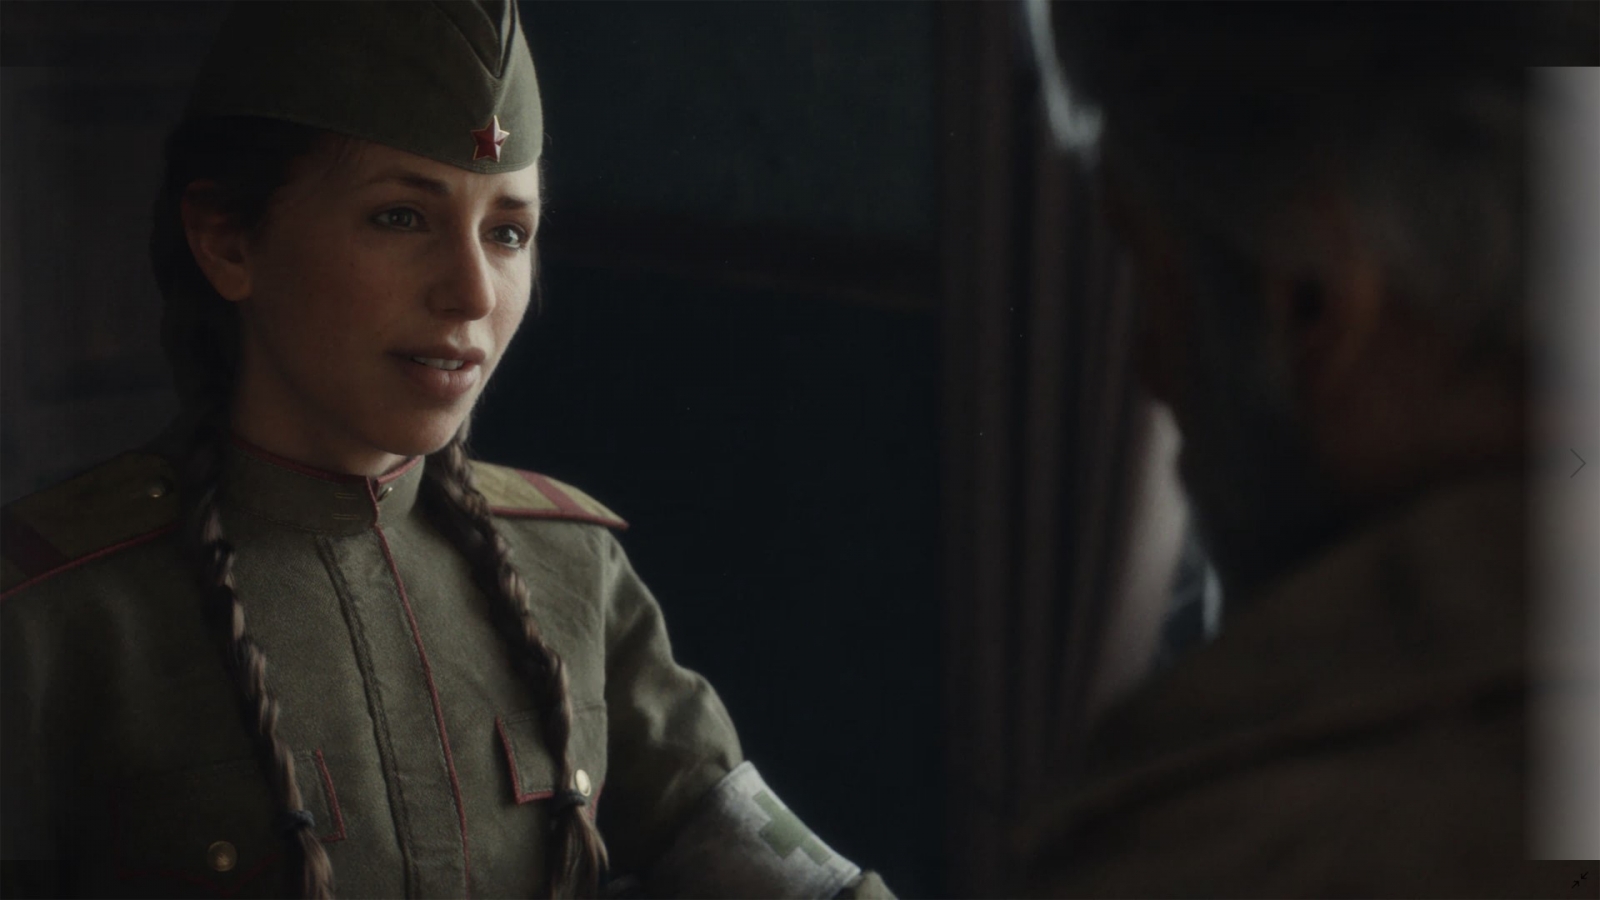 Call of Duty WW2 (Review) – The Late Night Session